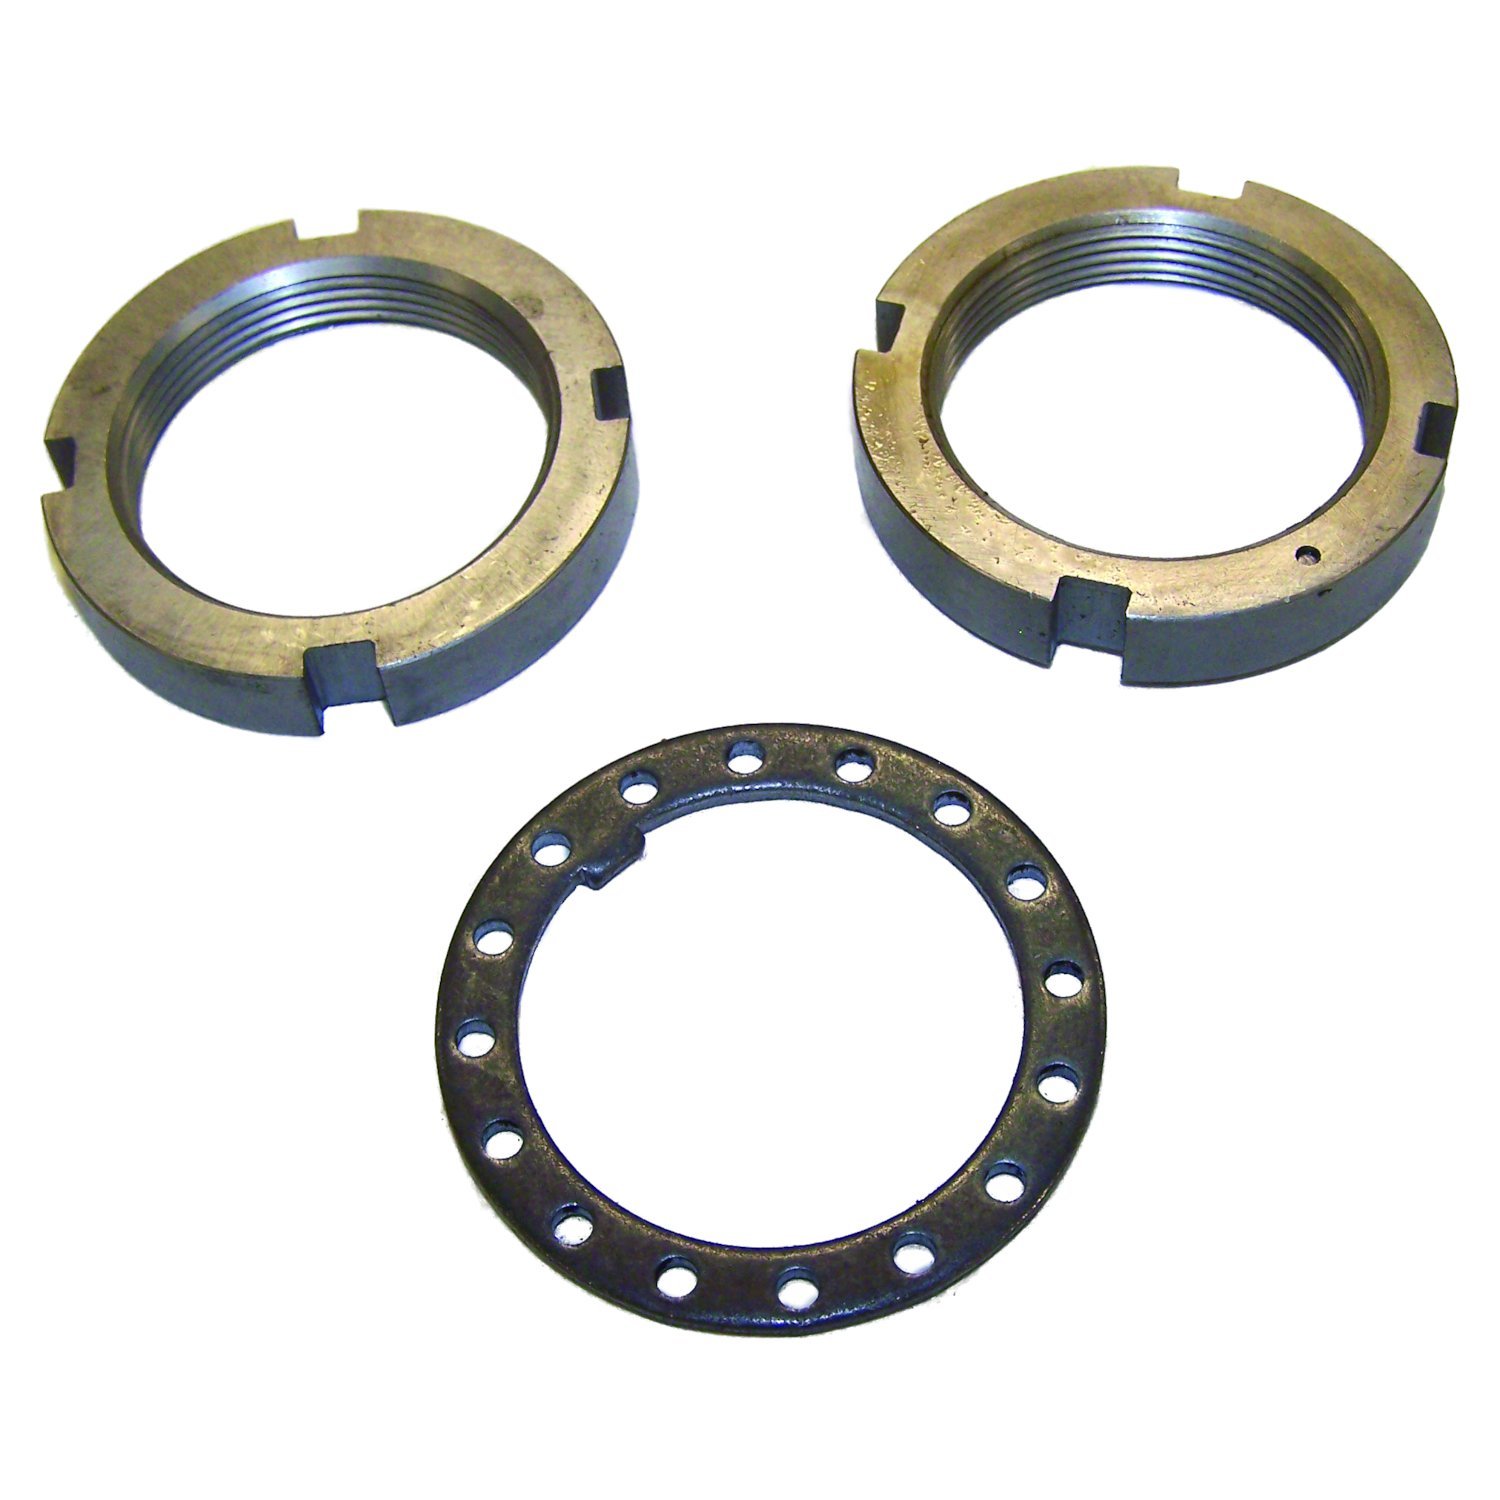 Front Spindle Nut Kit for 74-91 SJ, J-Series (2 Spindle Nuts & 1 Lock Washer)